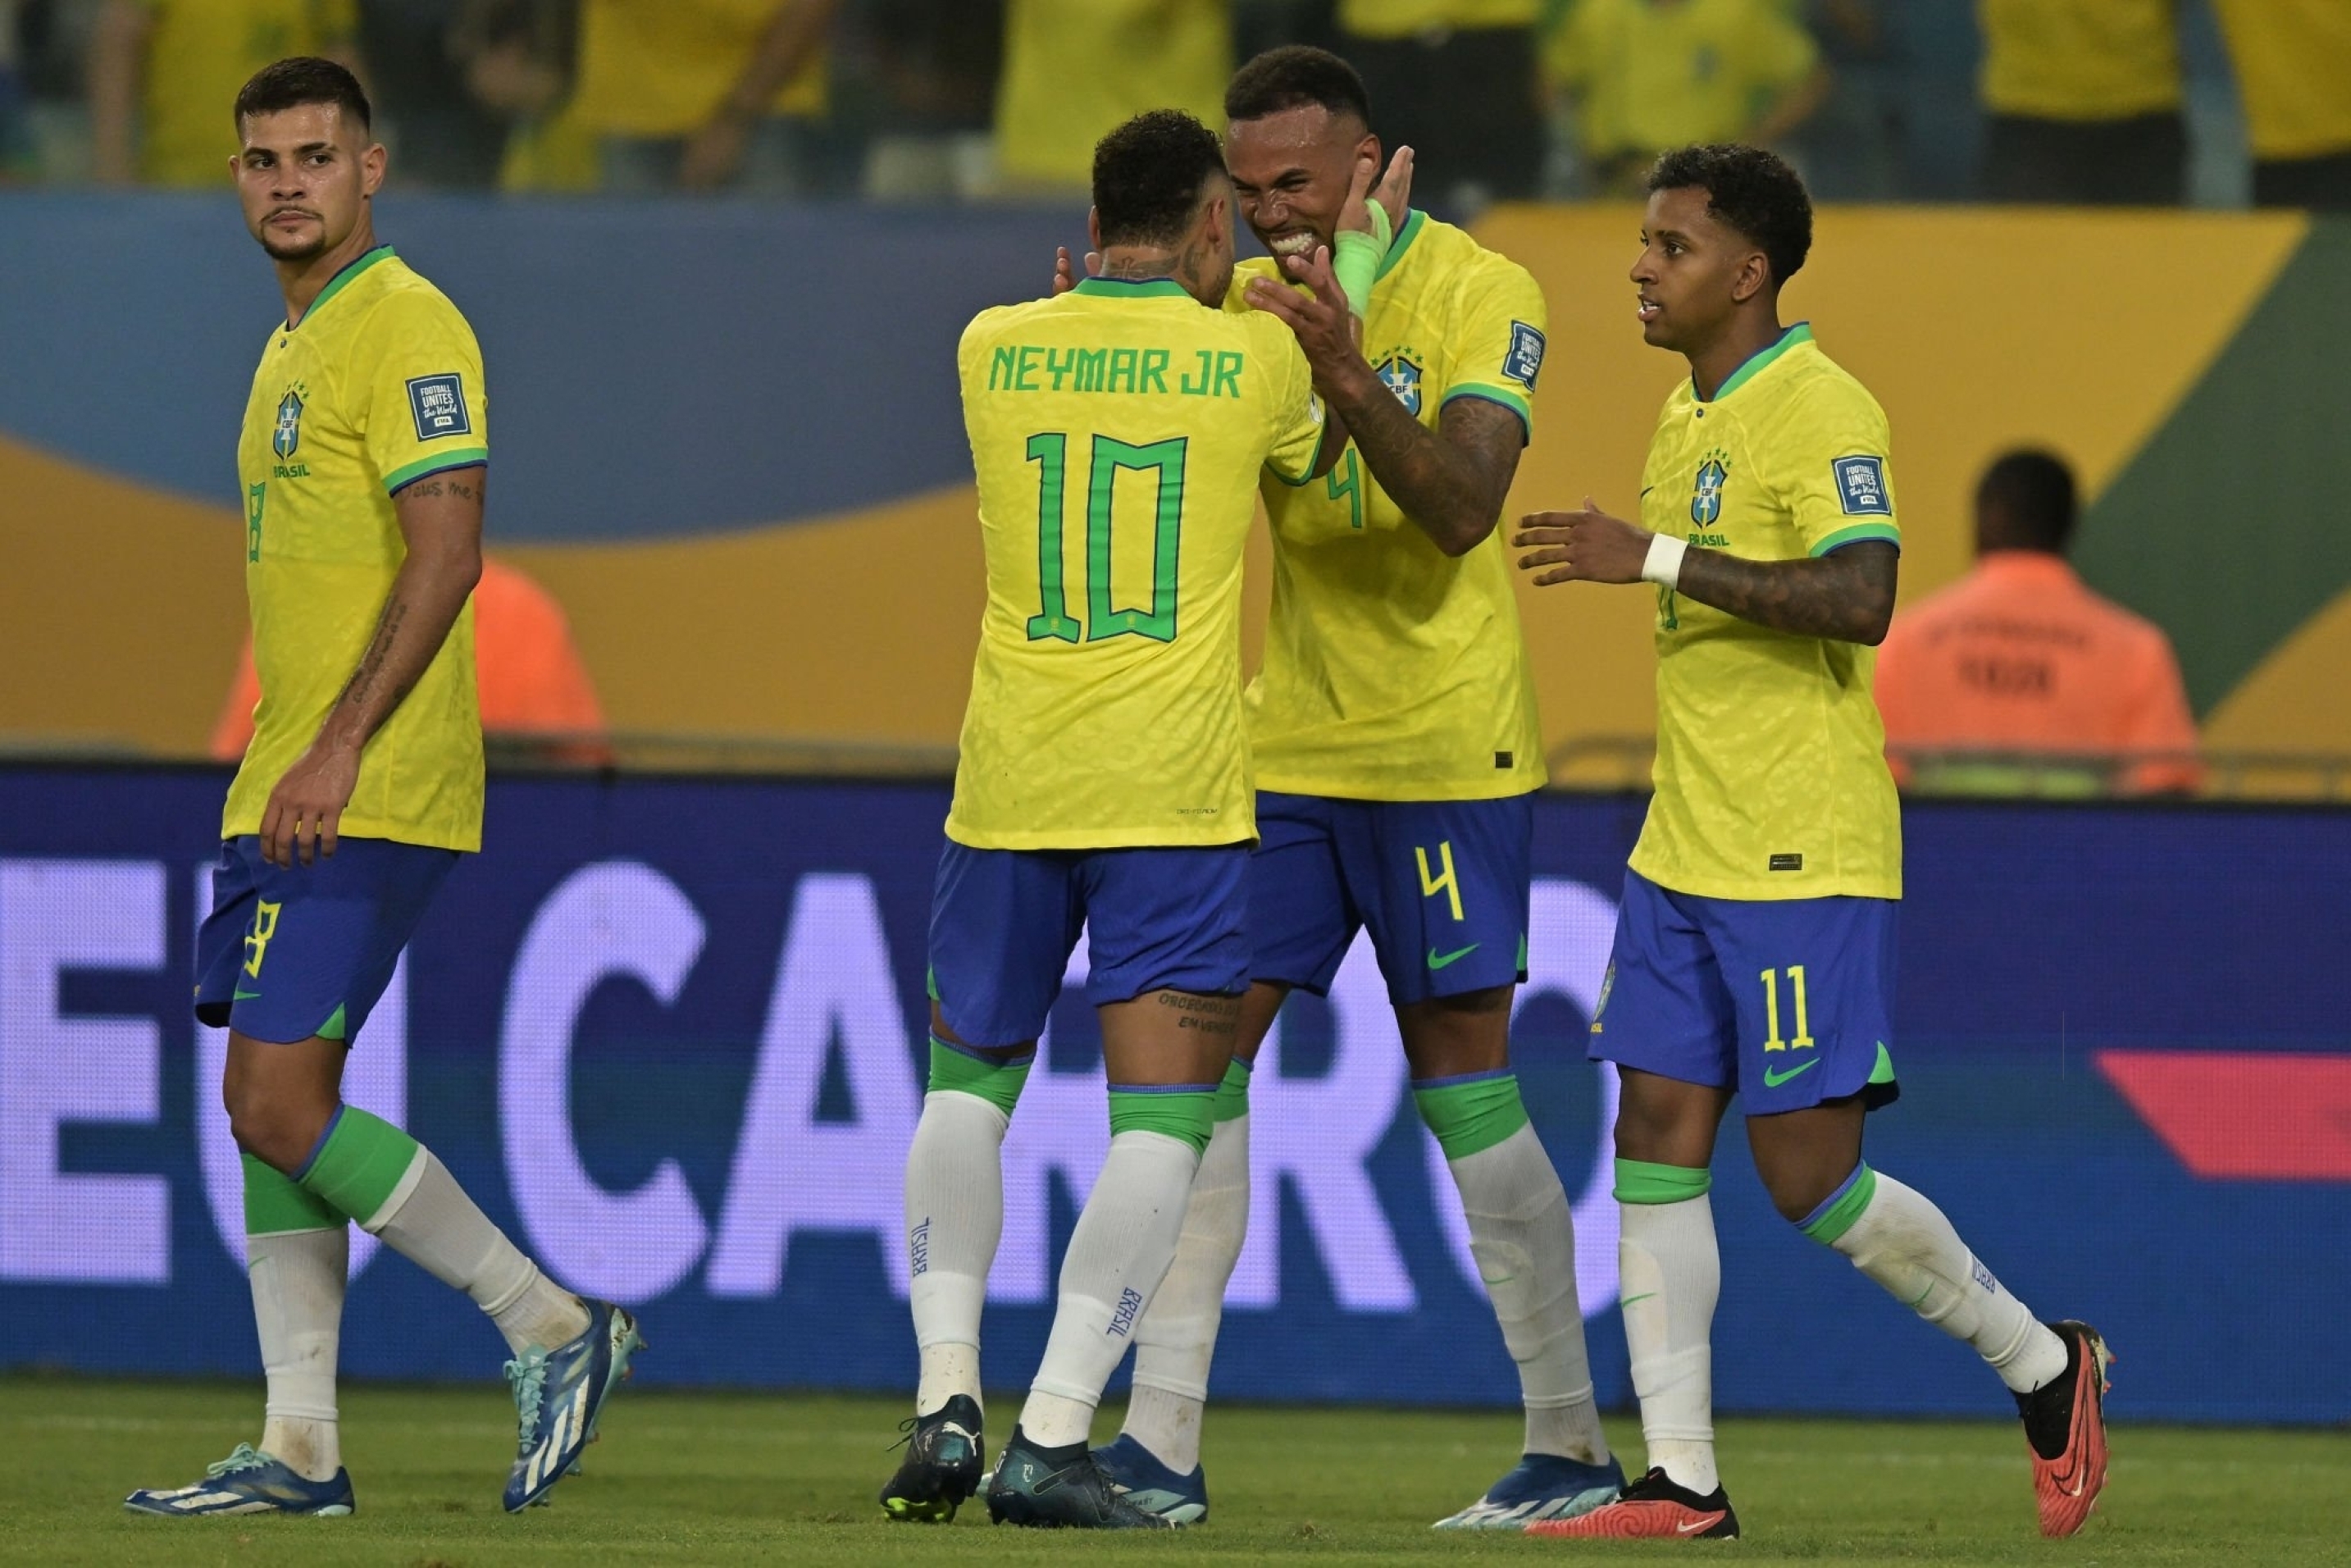 Brazil vs Colombia - BRA vs COL - Selecao will look to get back to winning ways after a 2-match winless run in the World Cup qualifers games